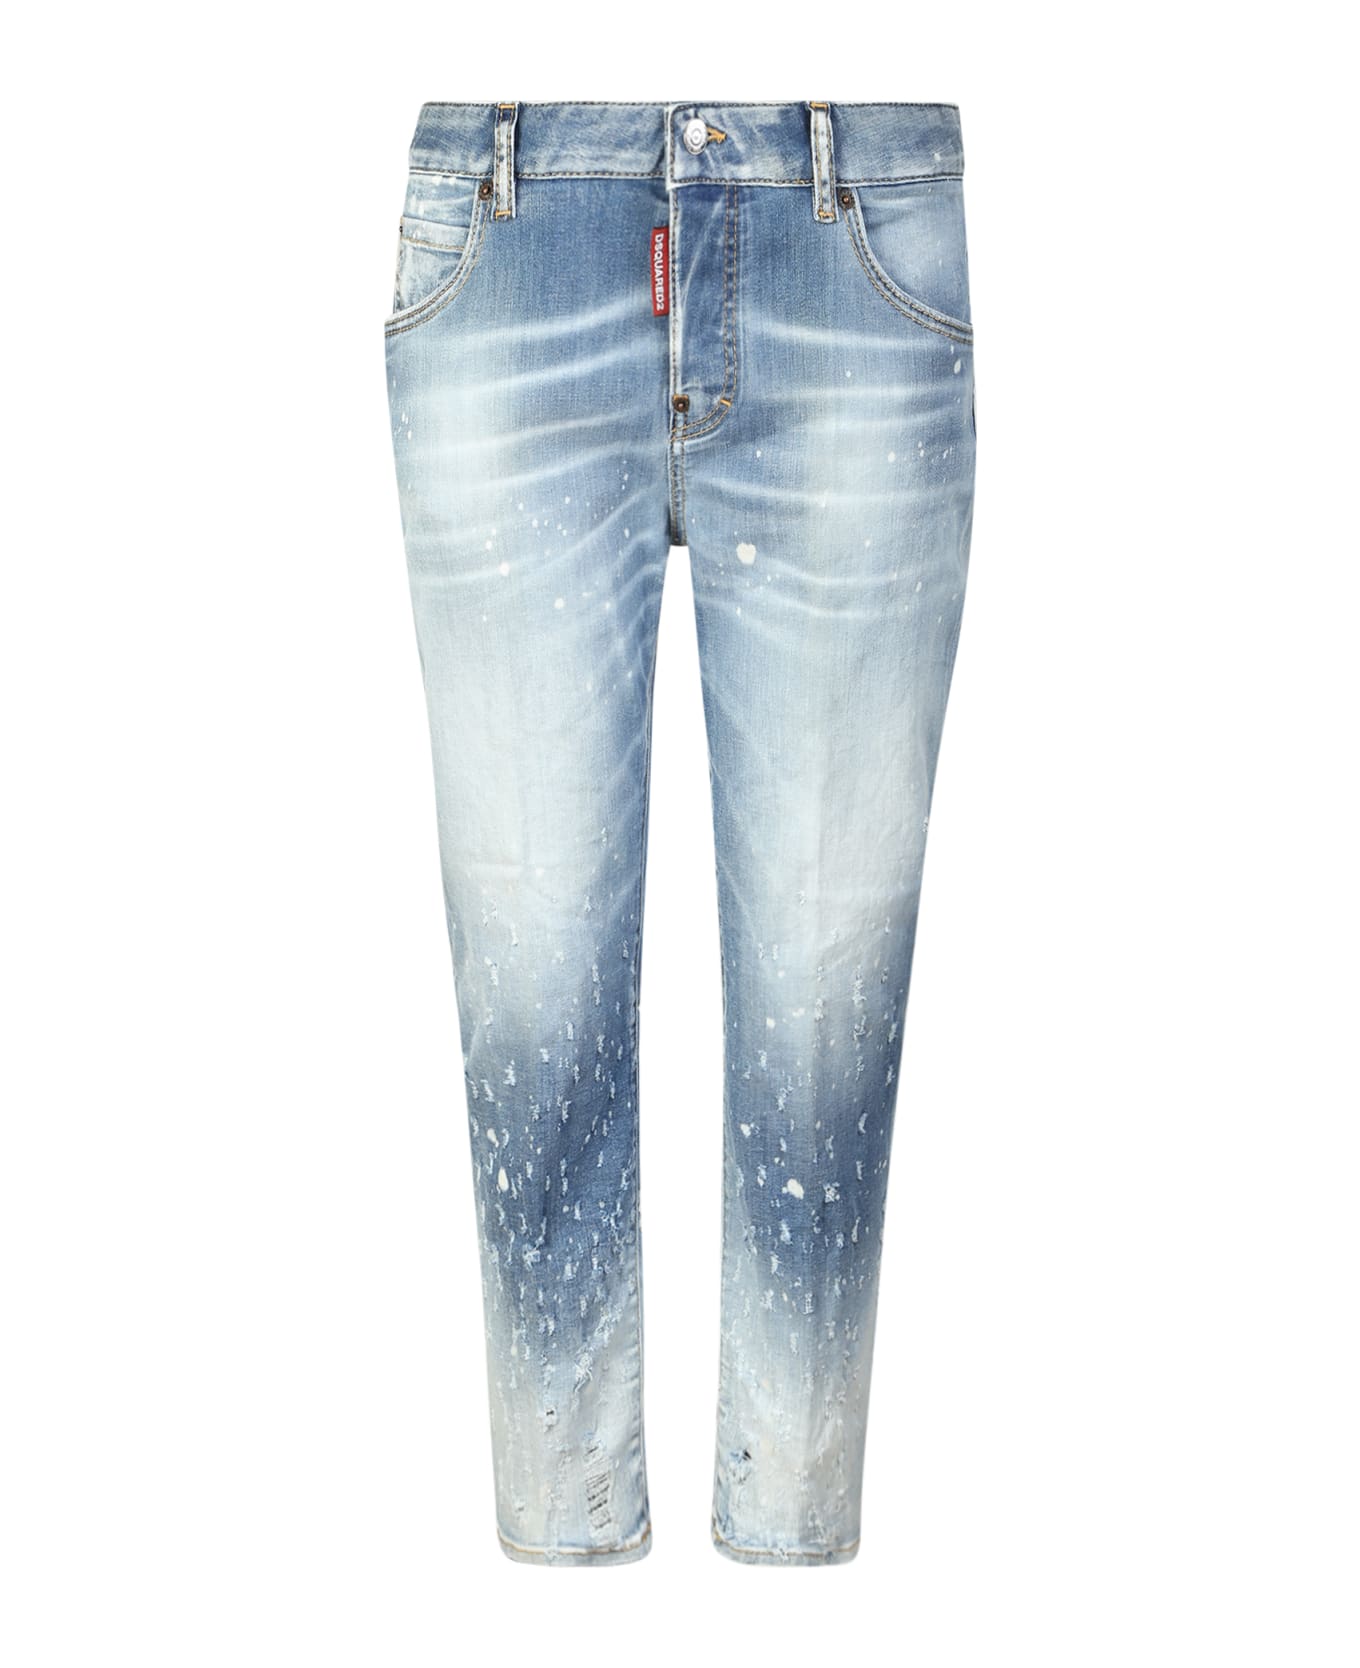 Dsquared2 Distressed Effect Cropped Skinny Jeans - Blue デニム